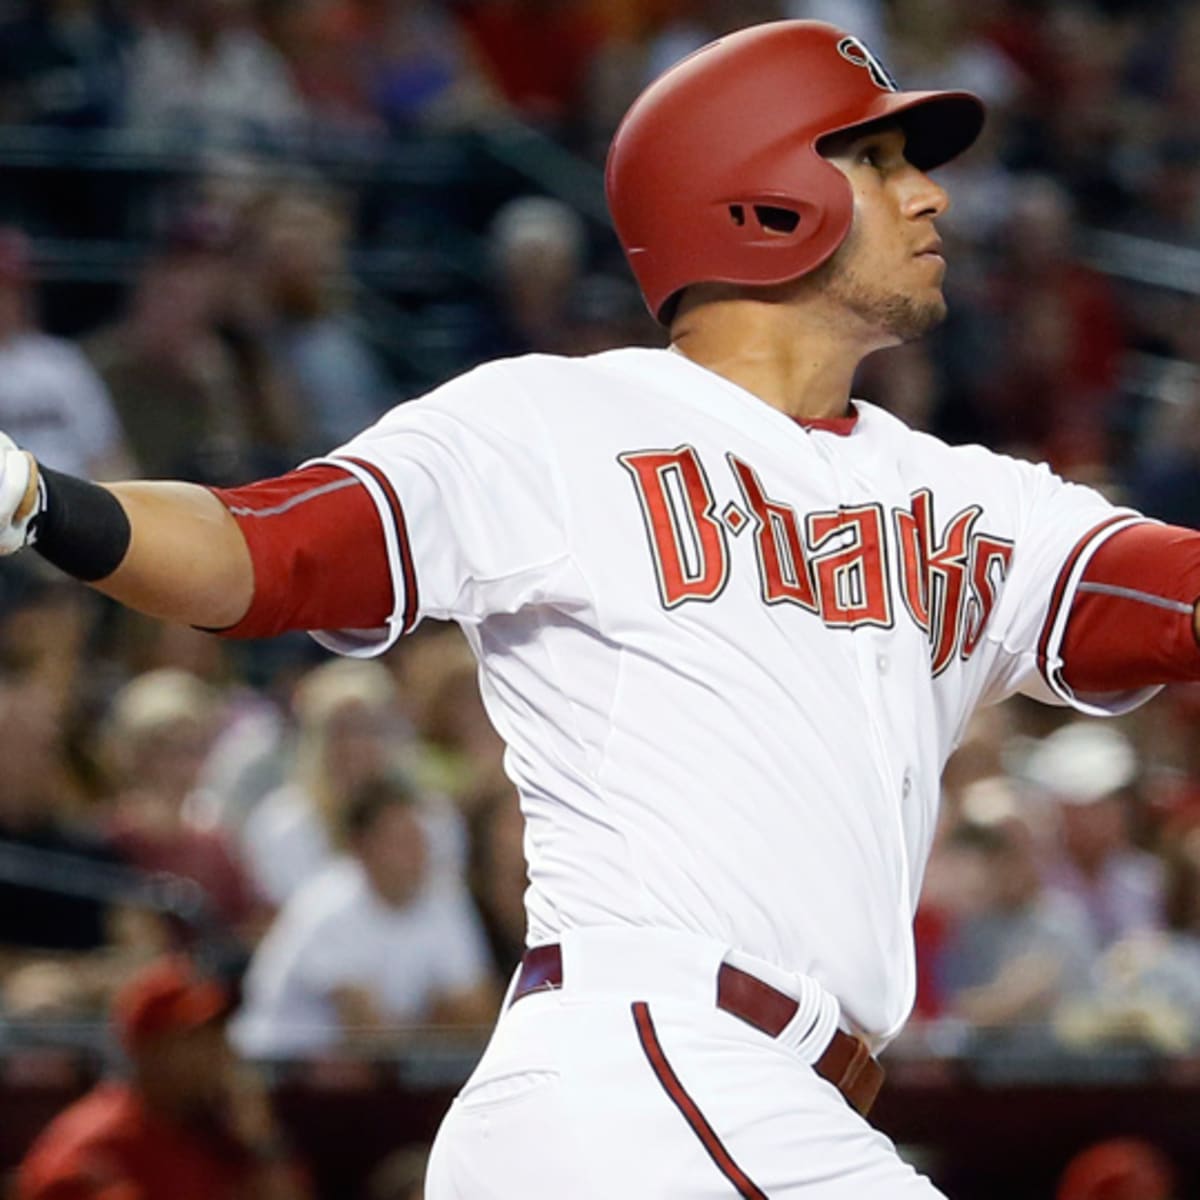 From Arizona to Venezuela Major Leaguer David Peralta is Committed